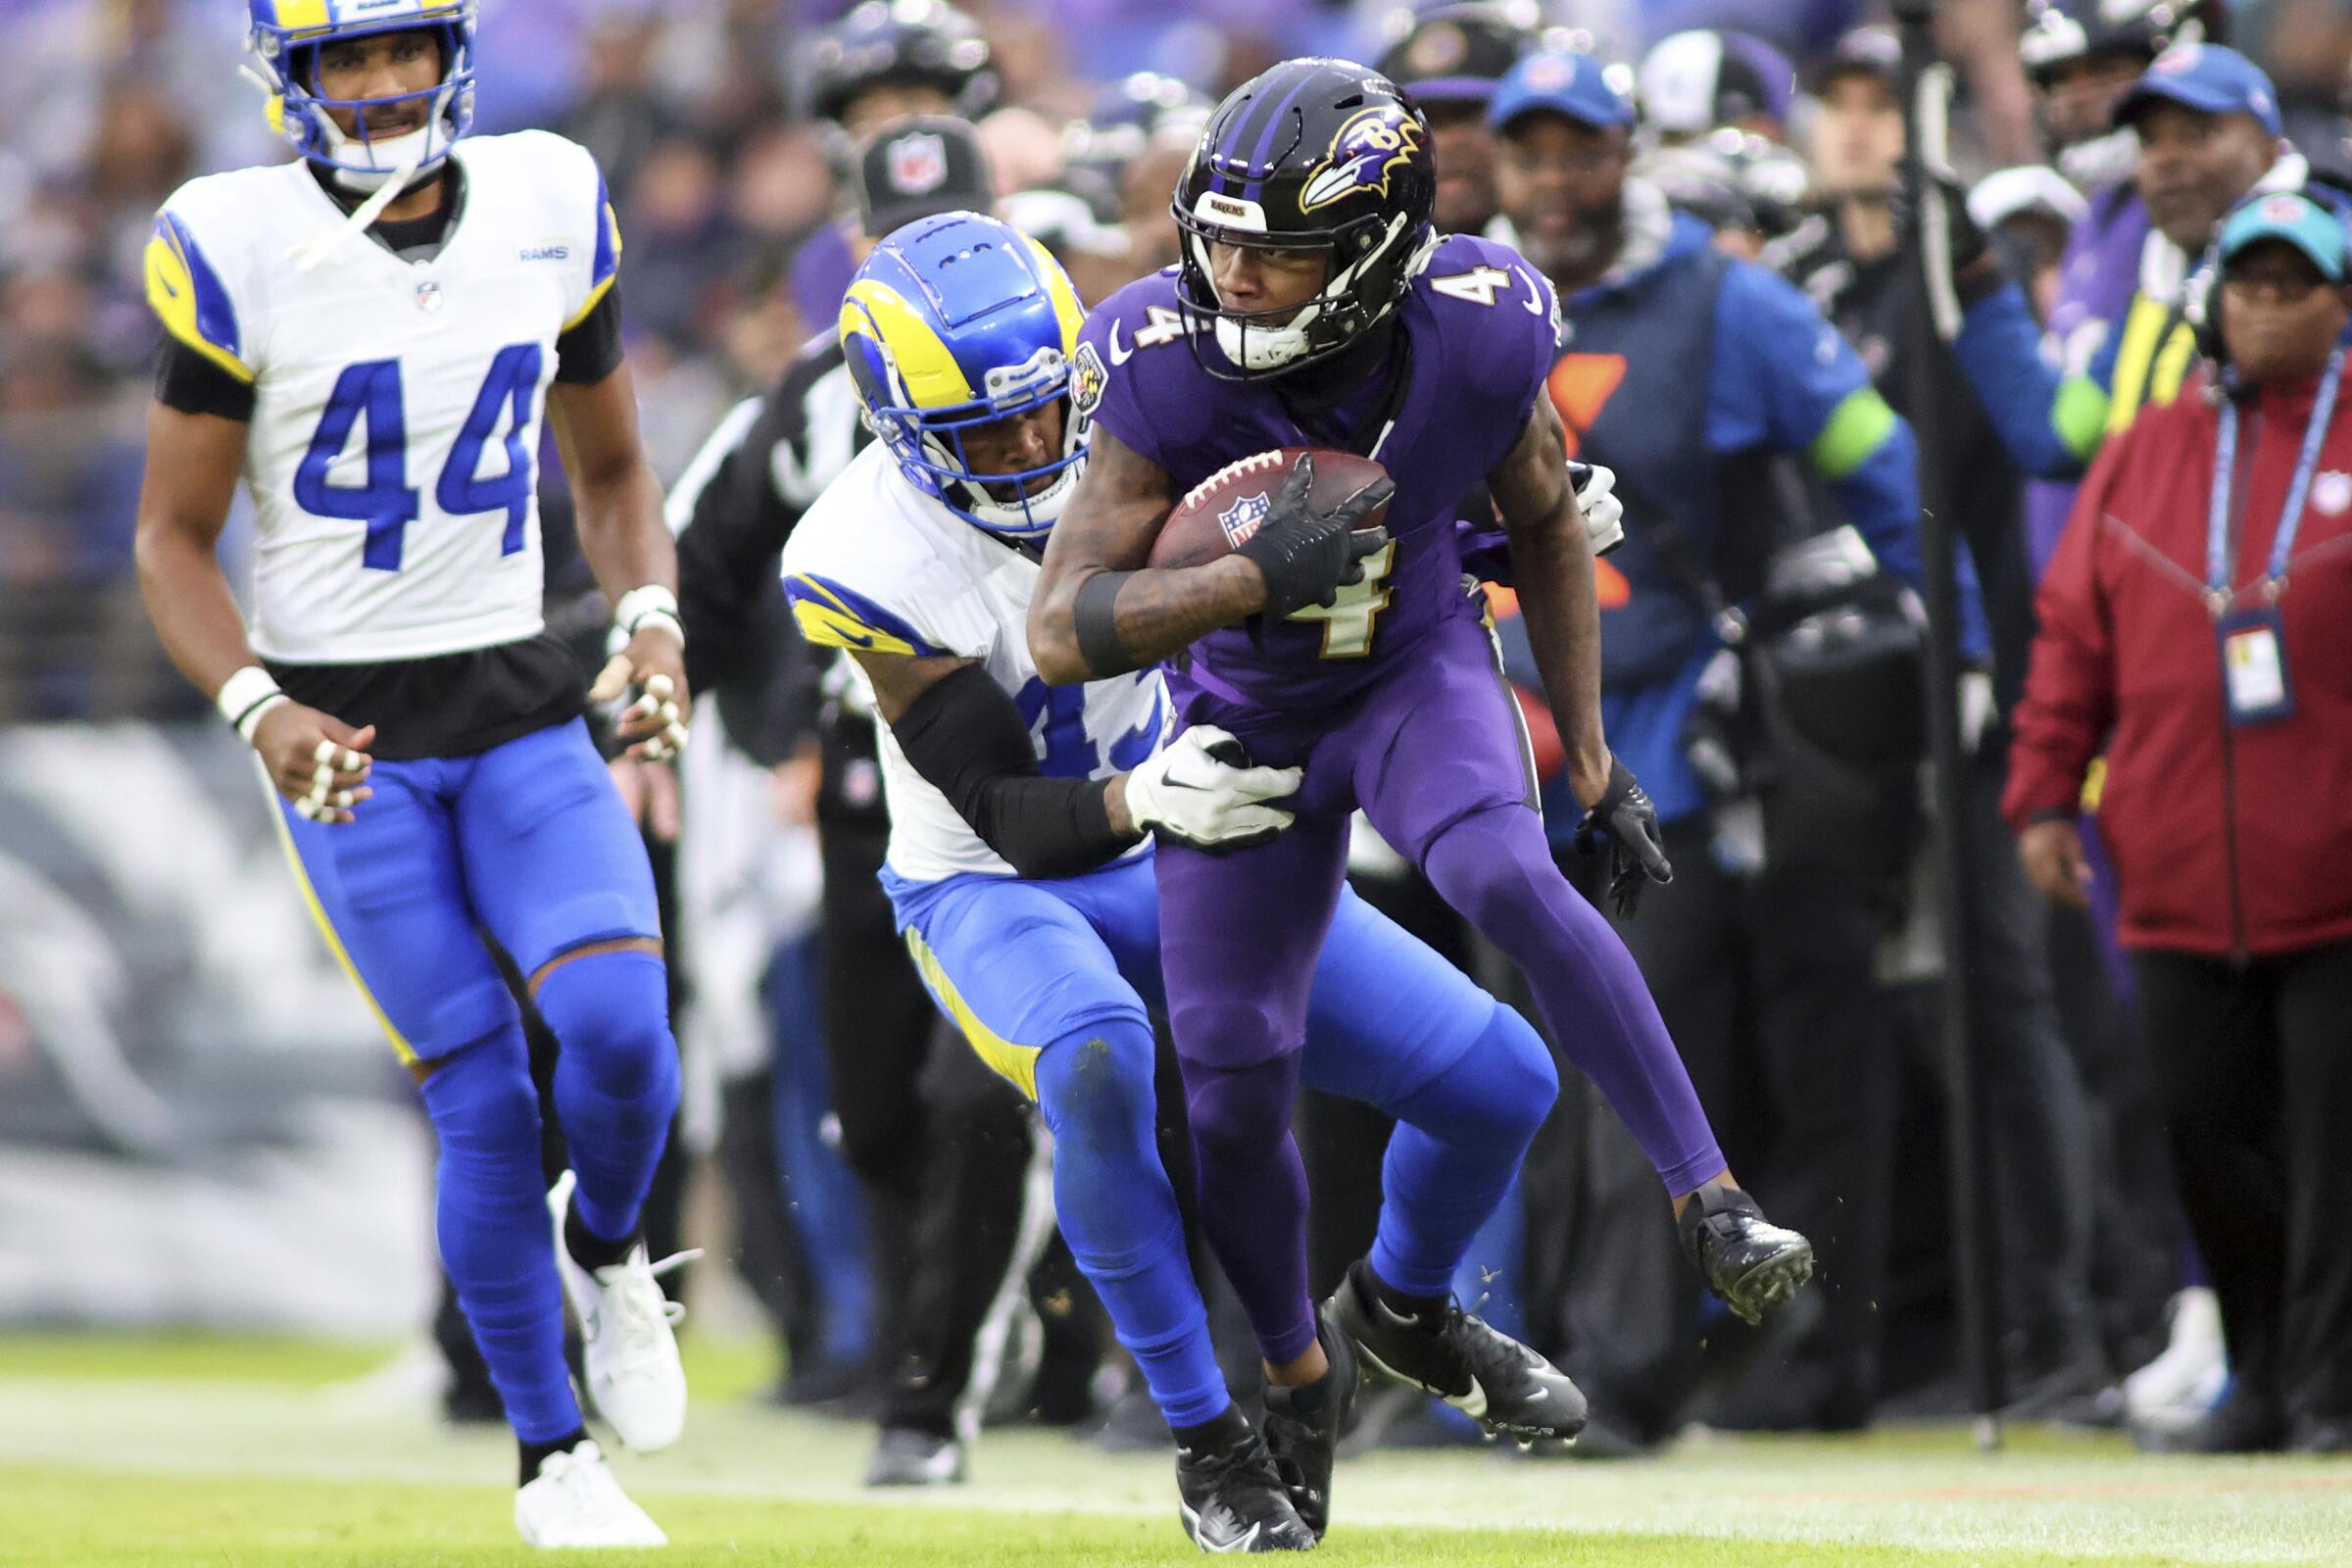 Ravens wide receiver Zay Flowers (4) runs after a catch against the Rams.